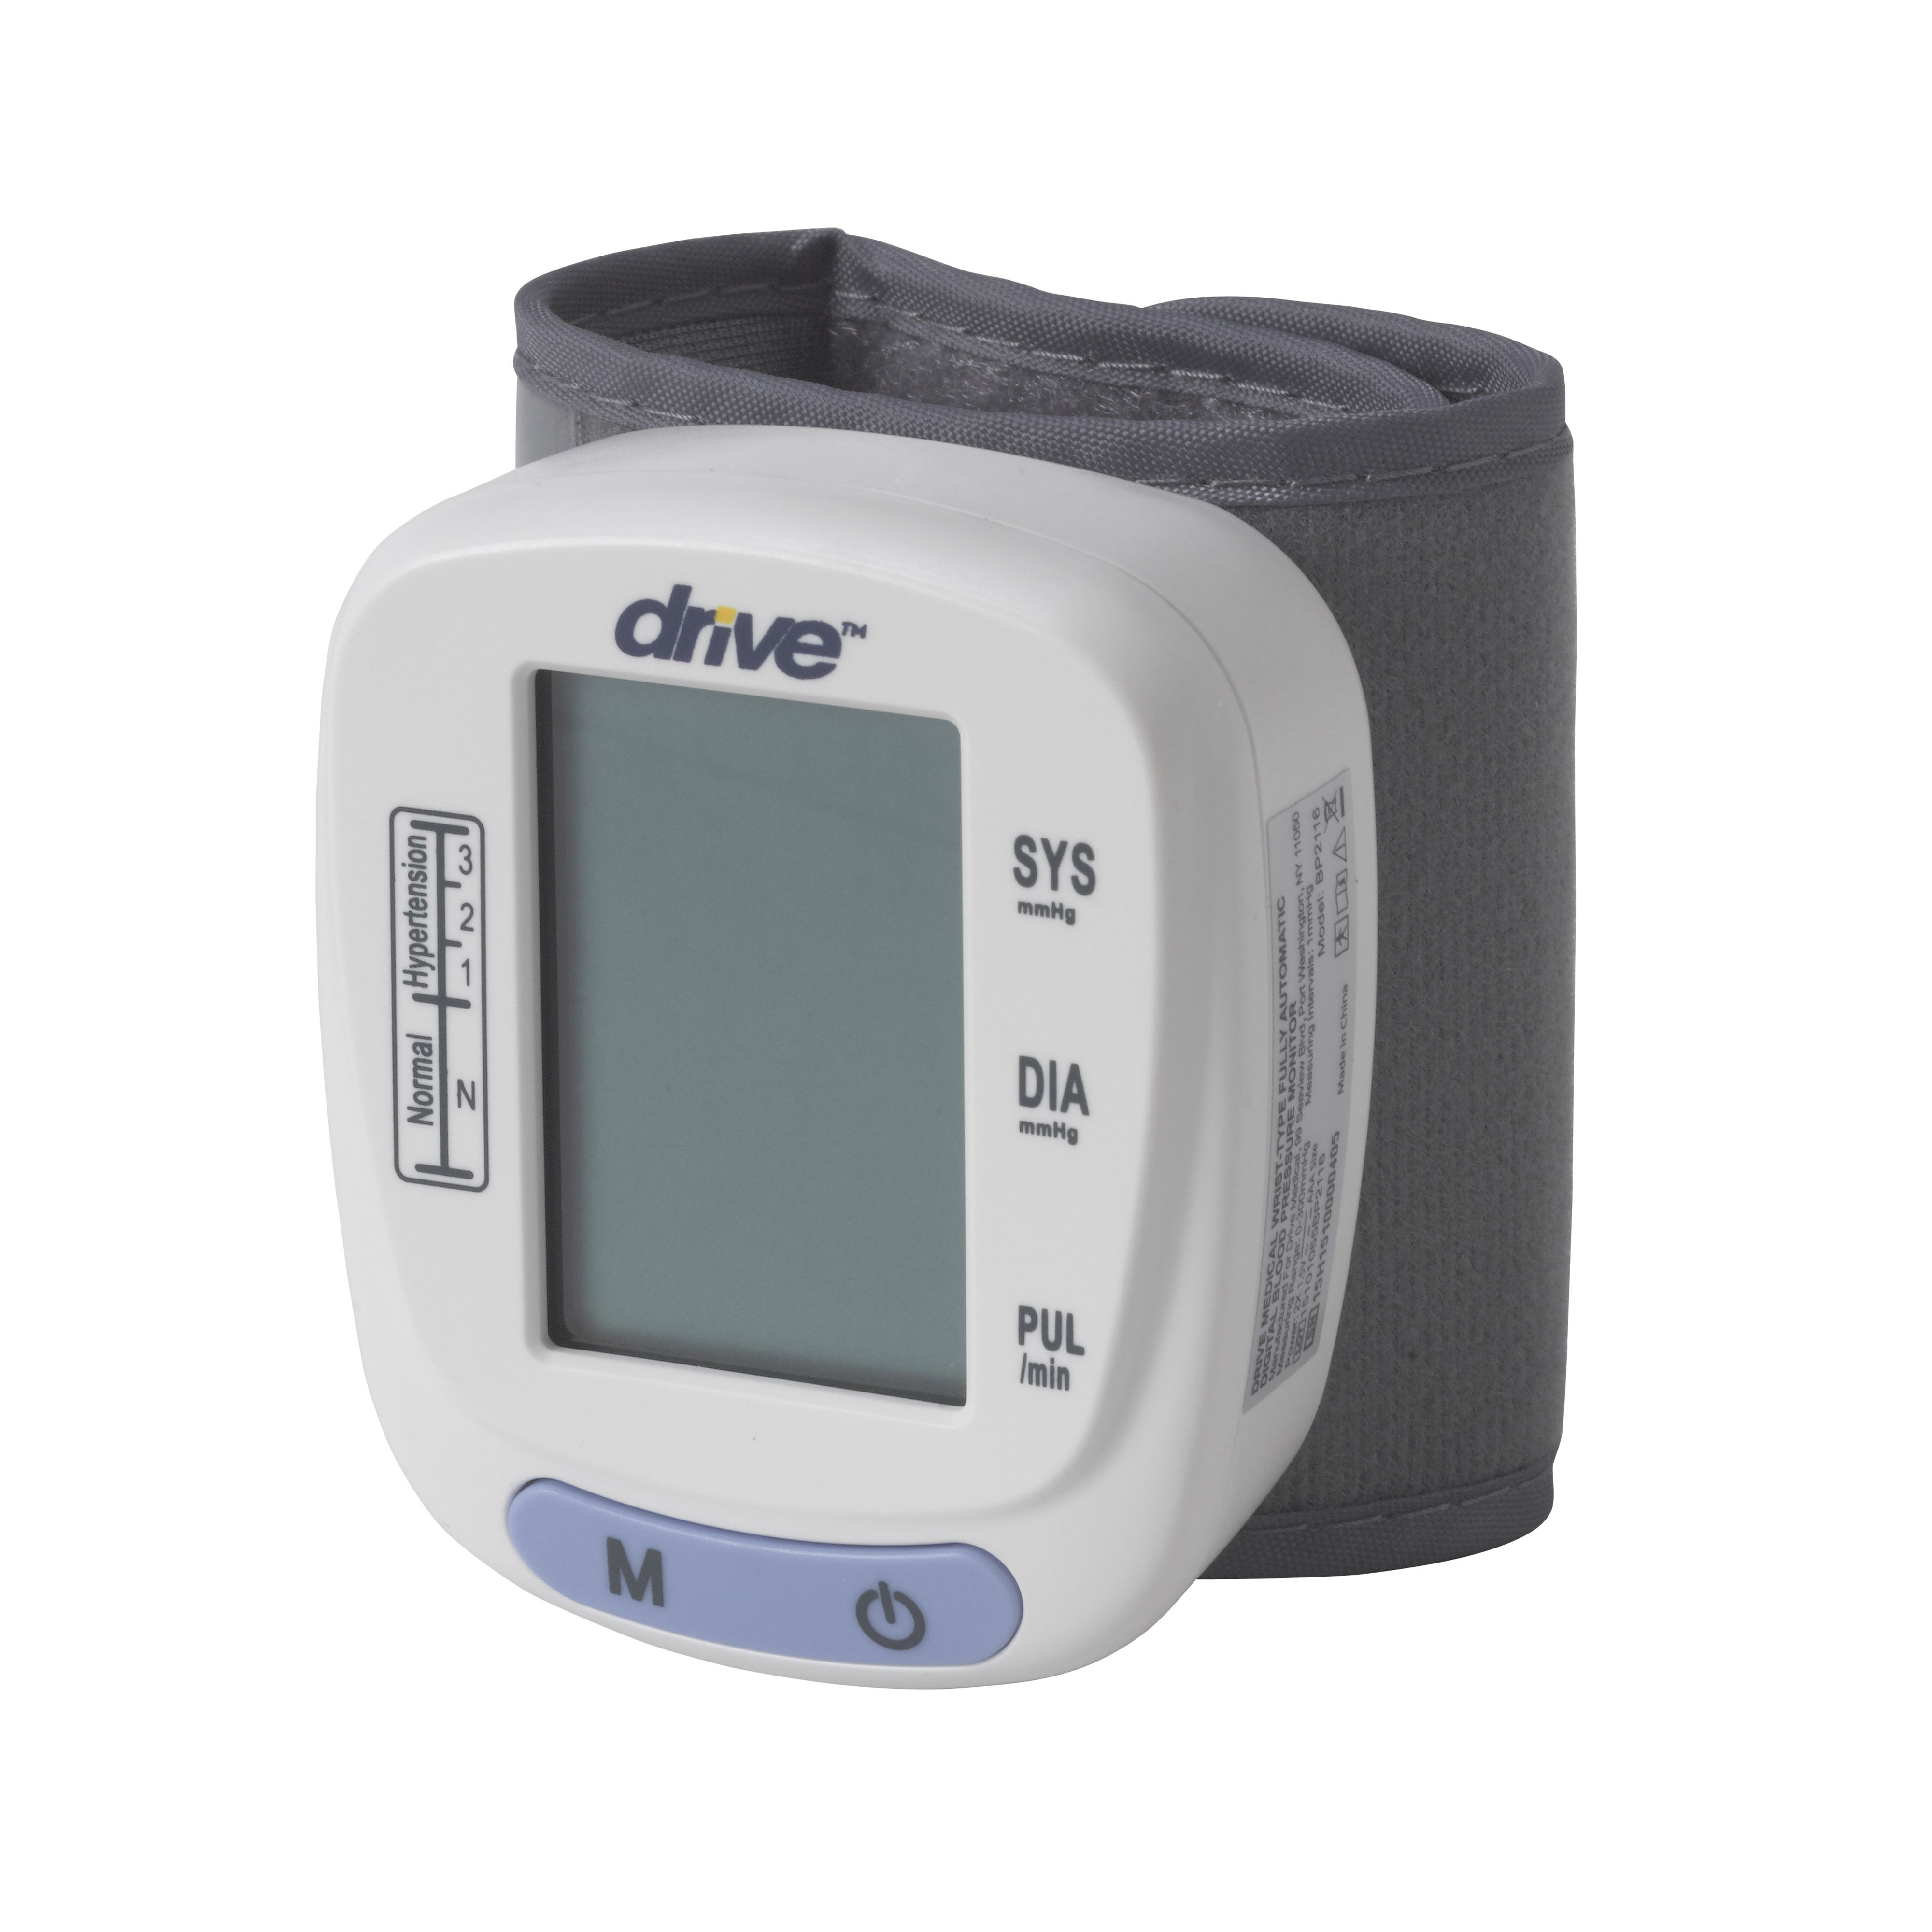 Drive Medical Automatic Blood Pressure Monitor, Wrist Model - image 5 of 7